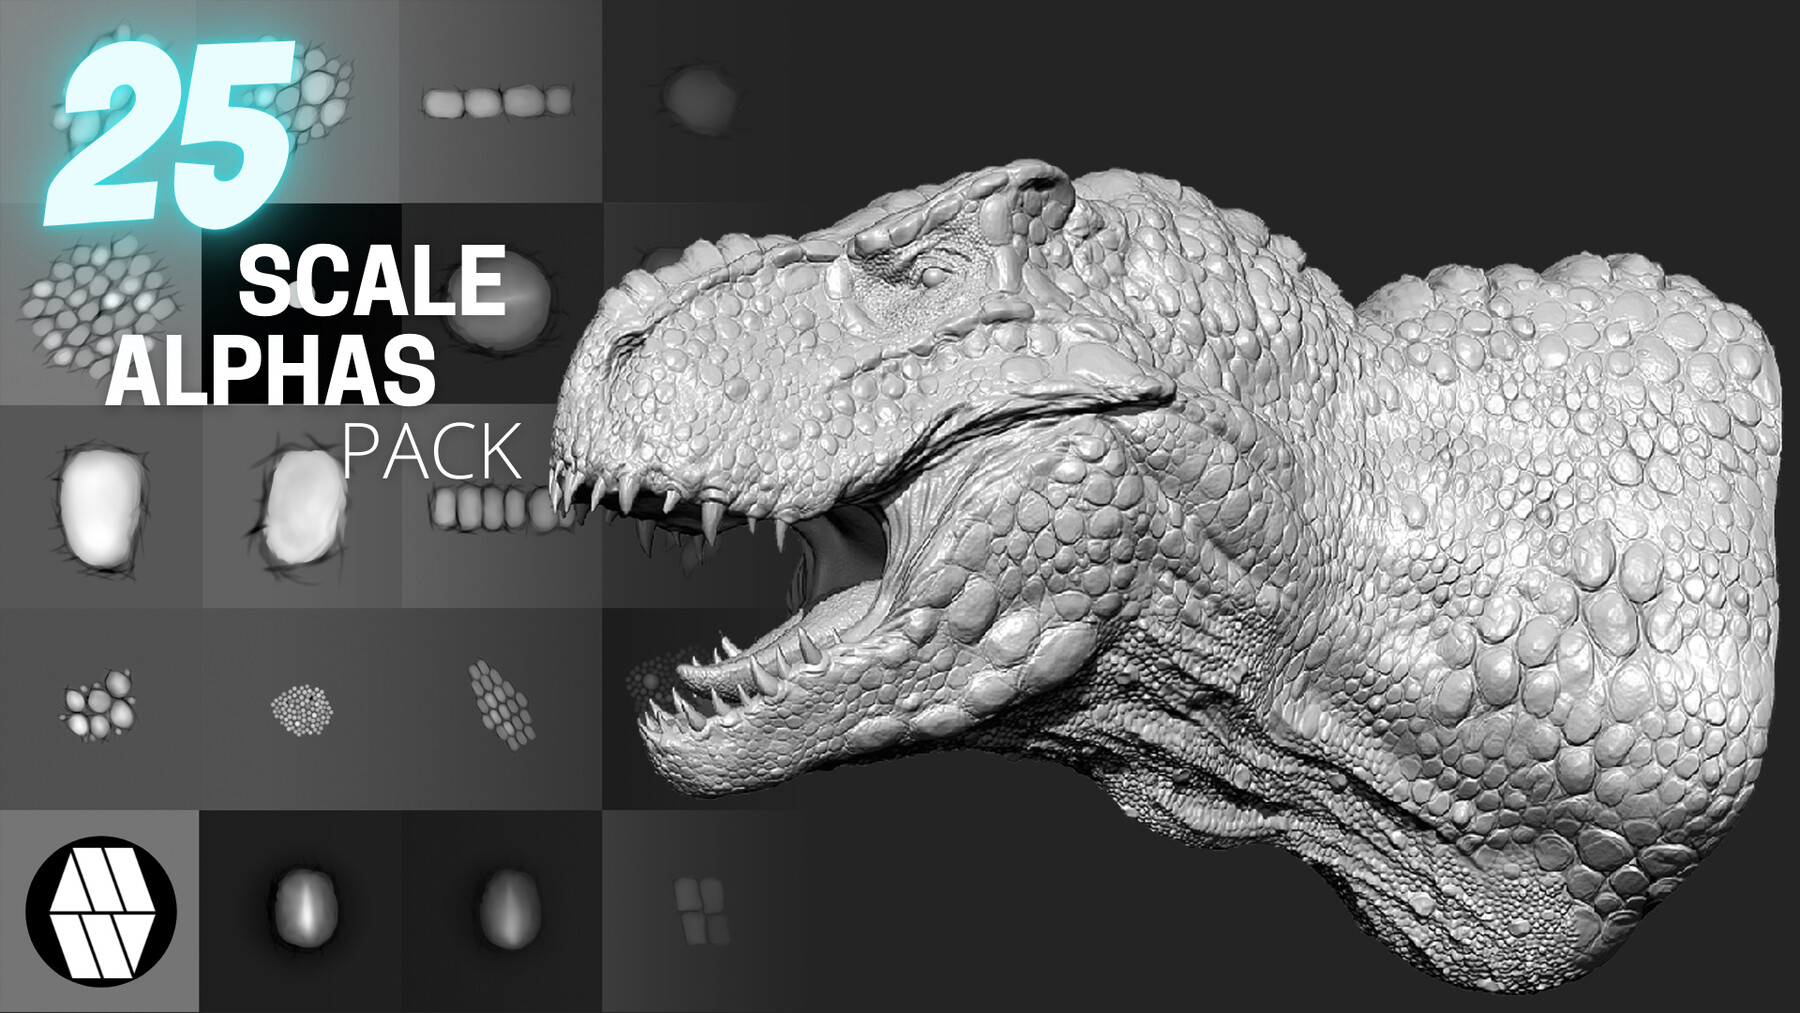 zbrush alphas scale